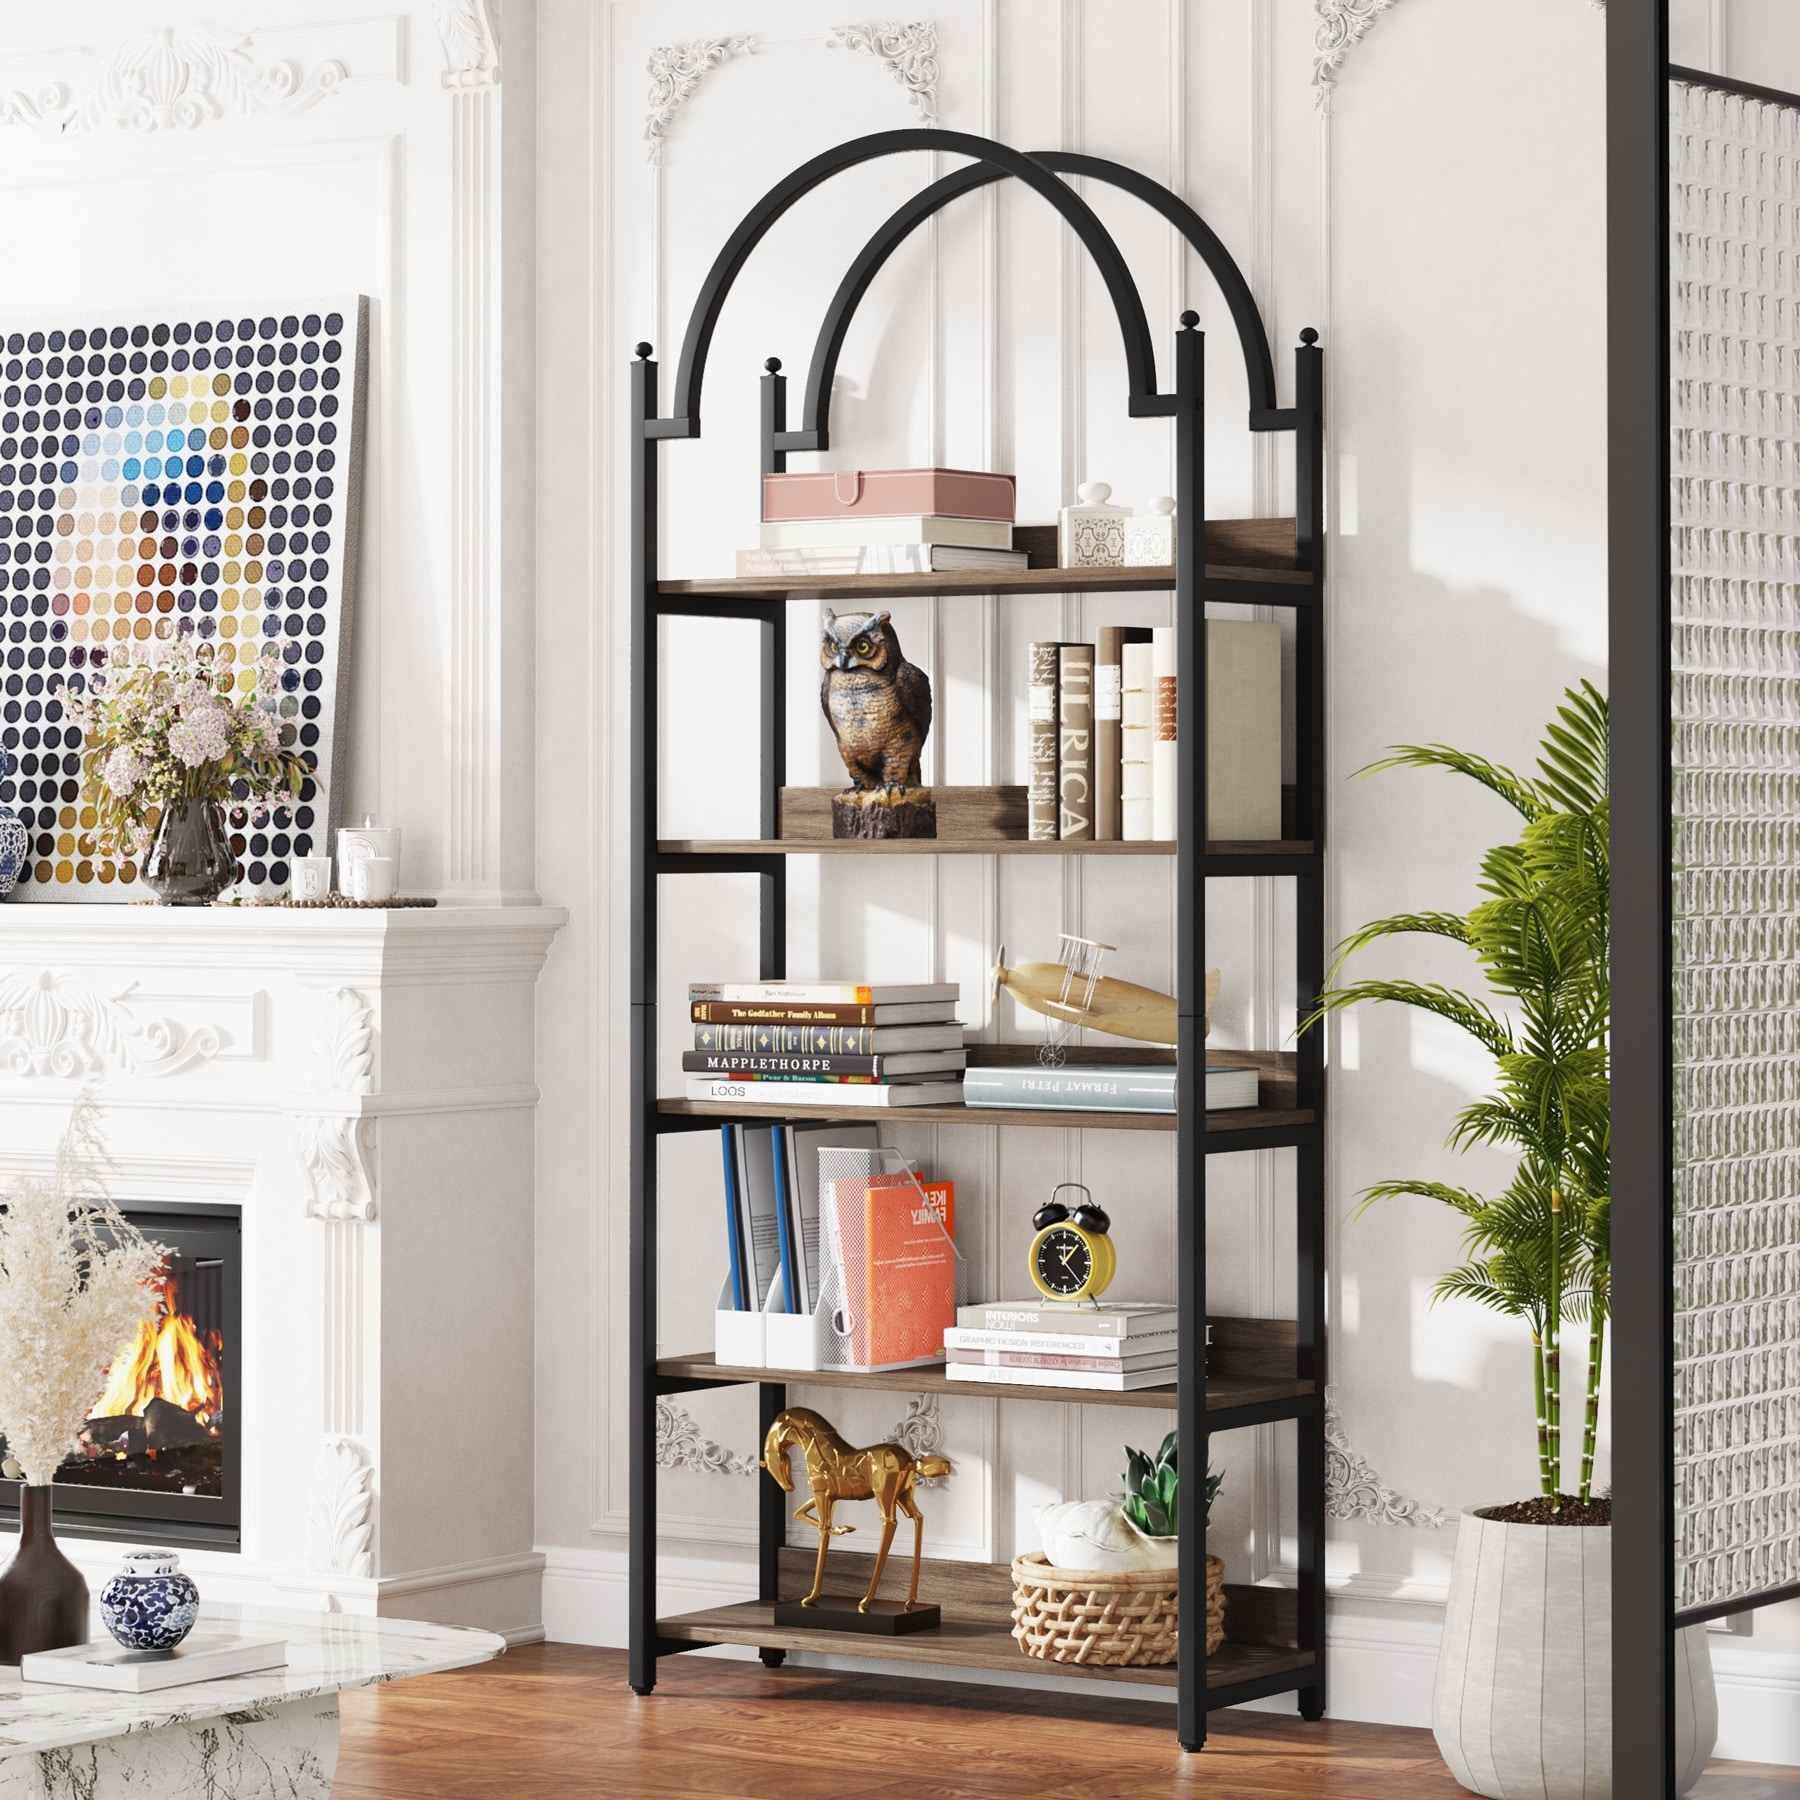 https://ak1.ostkcdn.com/images/products/is/images/direct/f79530d35620764763d42fc215120becb10ebe48/5-Tier-Gold-Bookshelf%2C-Arched-Bookcase%2C-Storage-Rack-Shelves-in-Living-Room-Home-Office-Bedroom.jpg